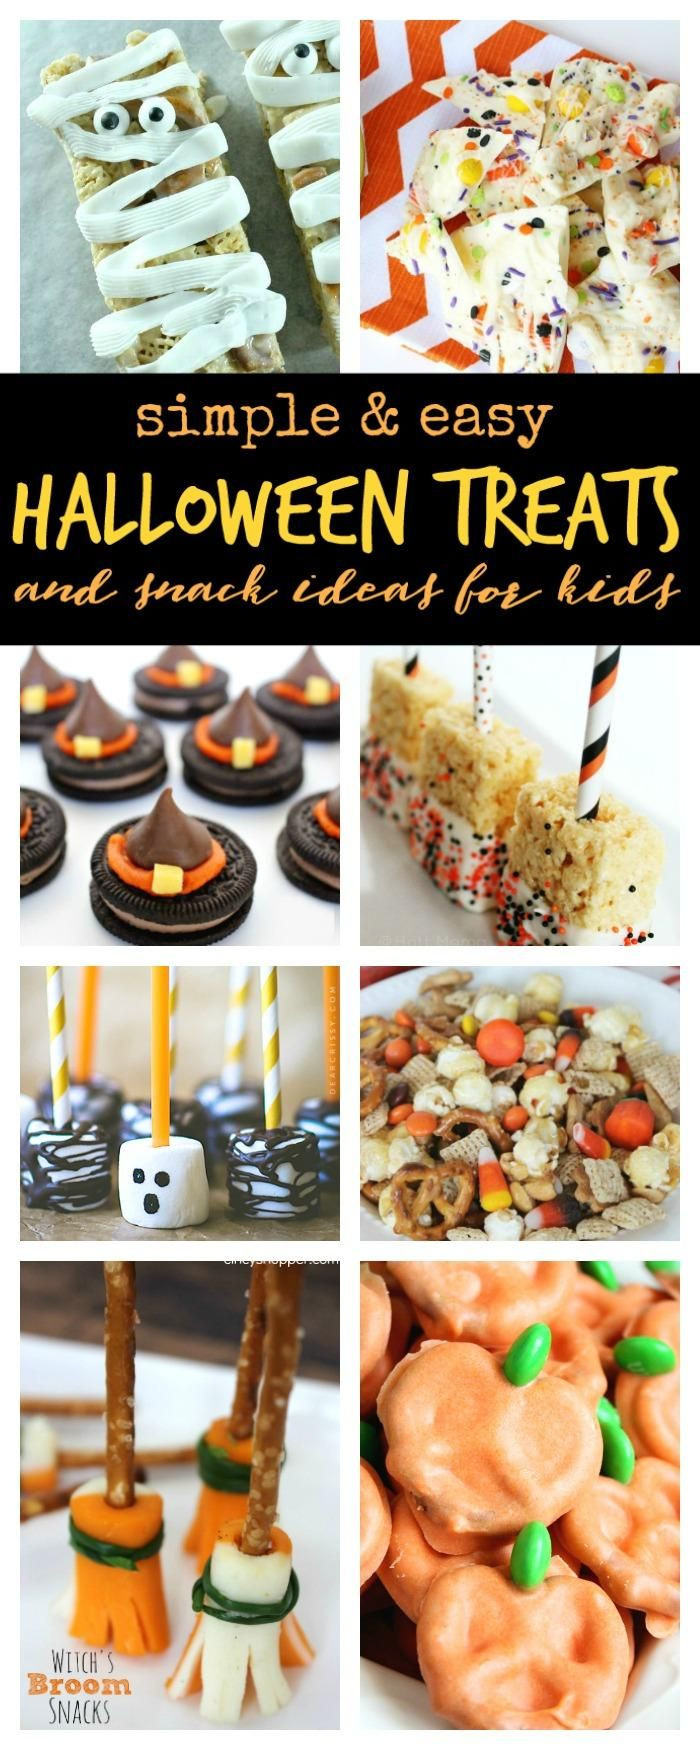 Easy Halloween Party Ideas
 best Best of Passion For Savings images on Pinterest